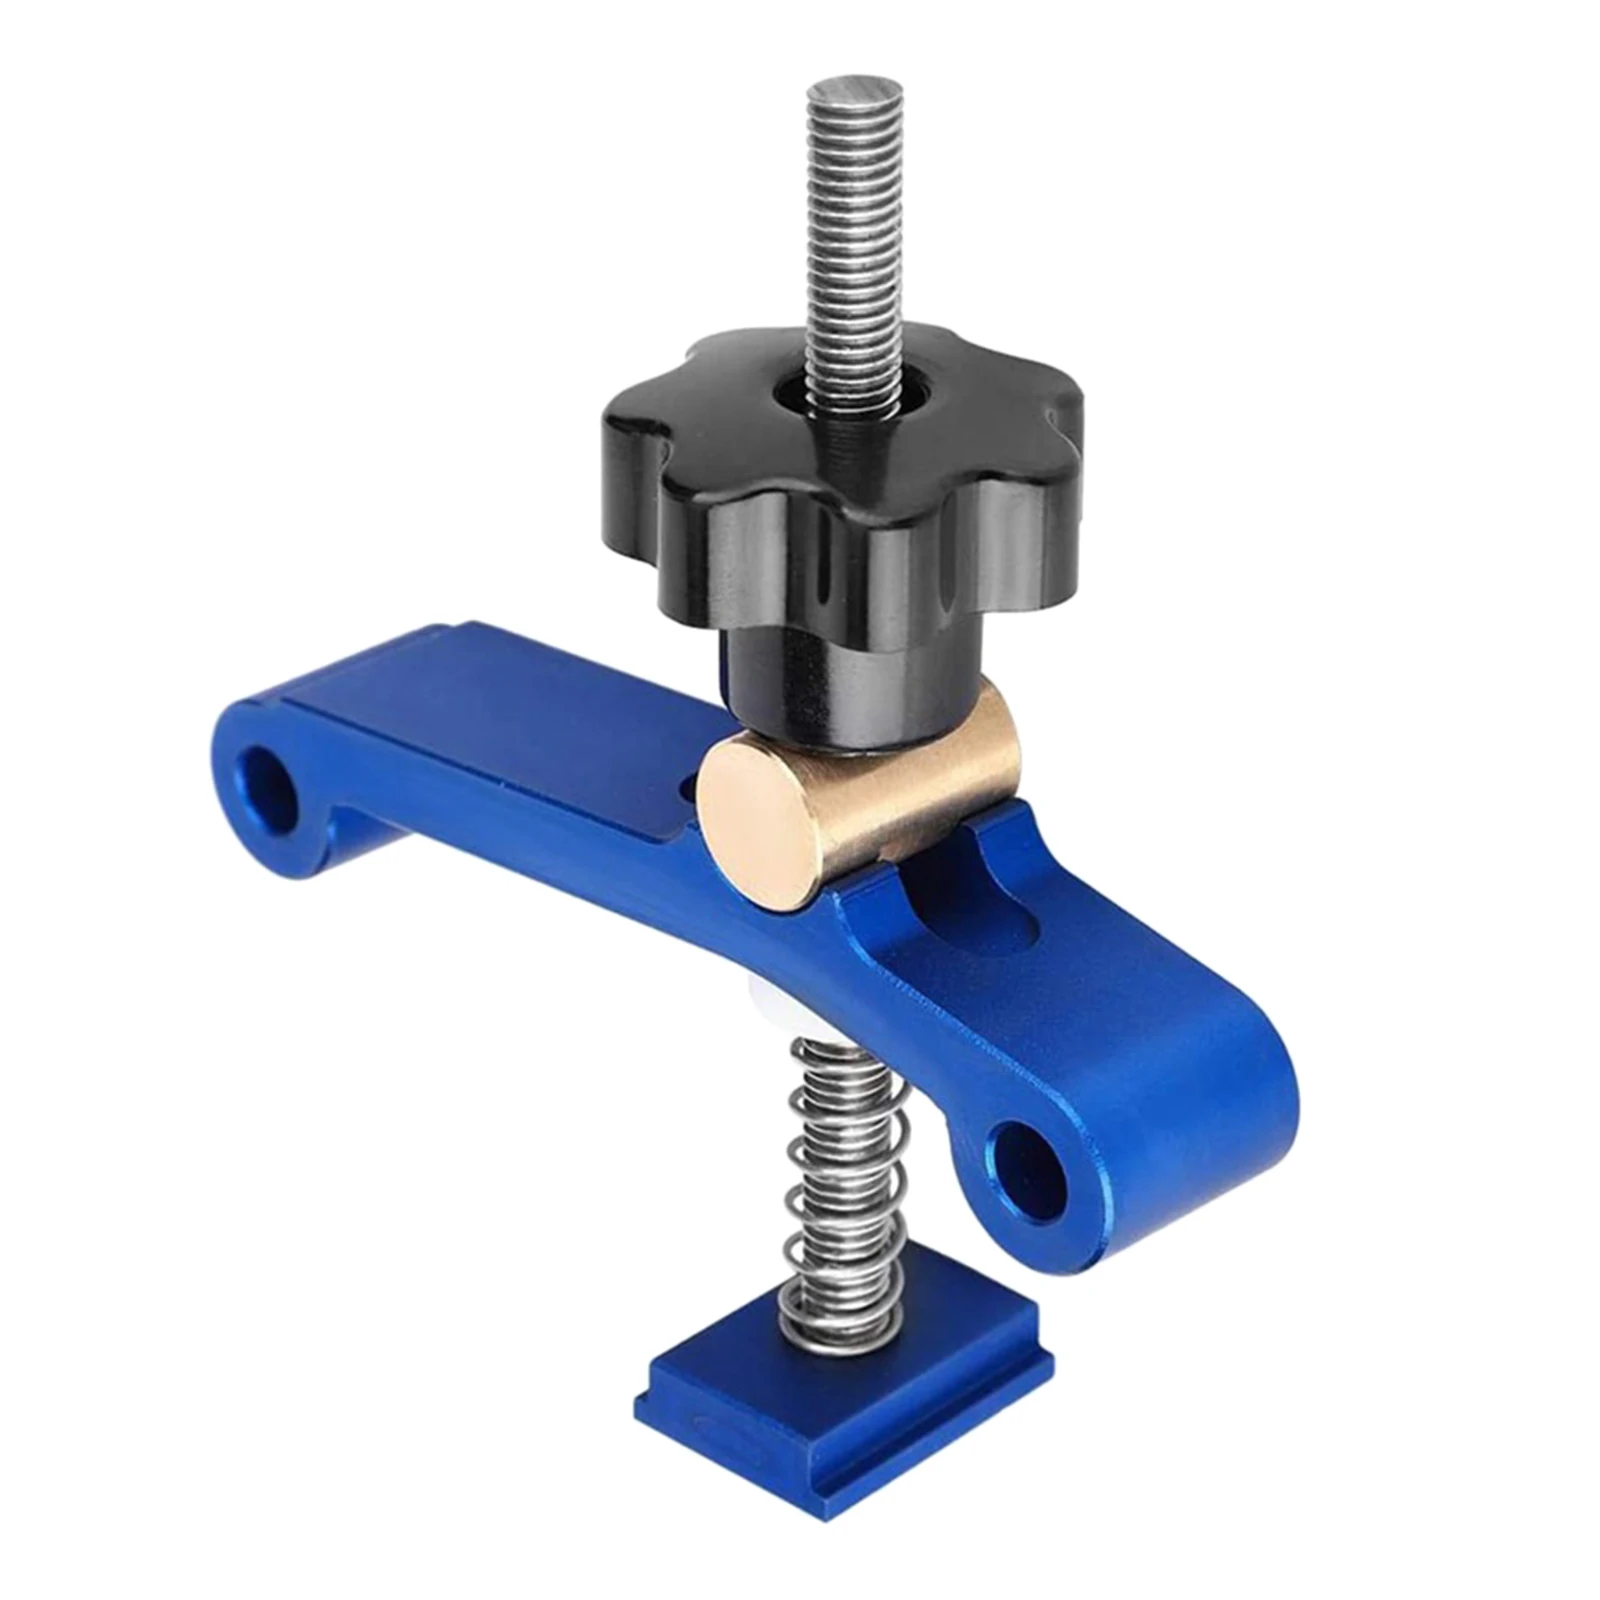 T-Slot Clamp Metal Quick Acting Fixing Hold Down Clamp Set M8 T-screw Threaded Rod for T-Slot T-Track Woodworking Tool Clamp